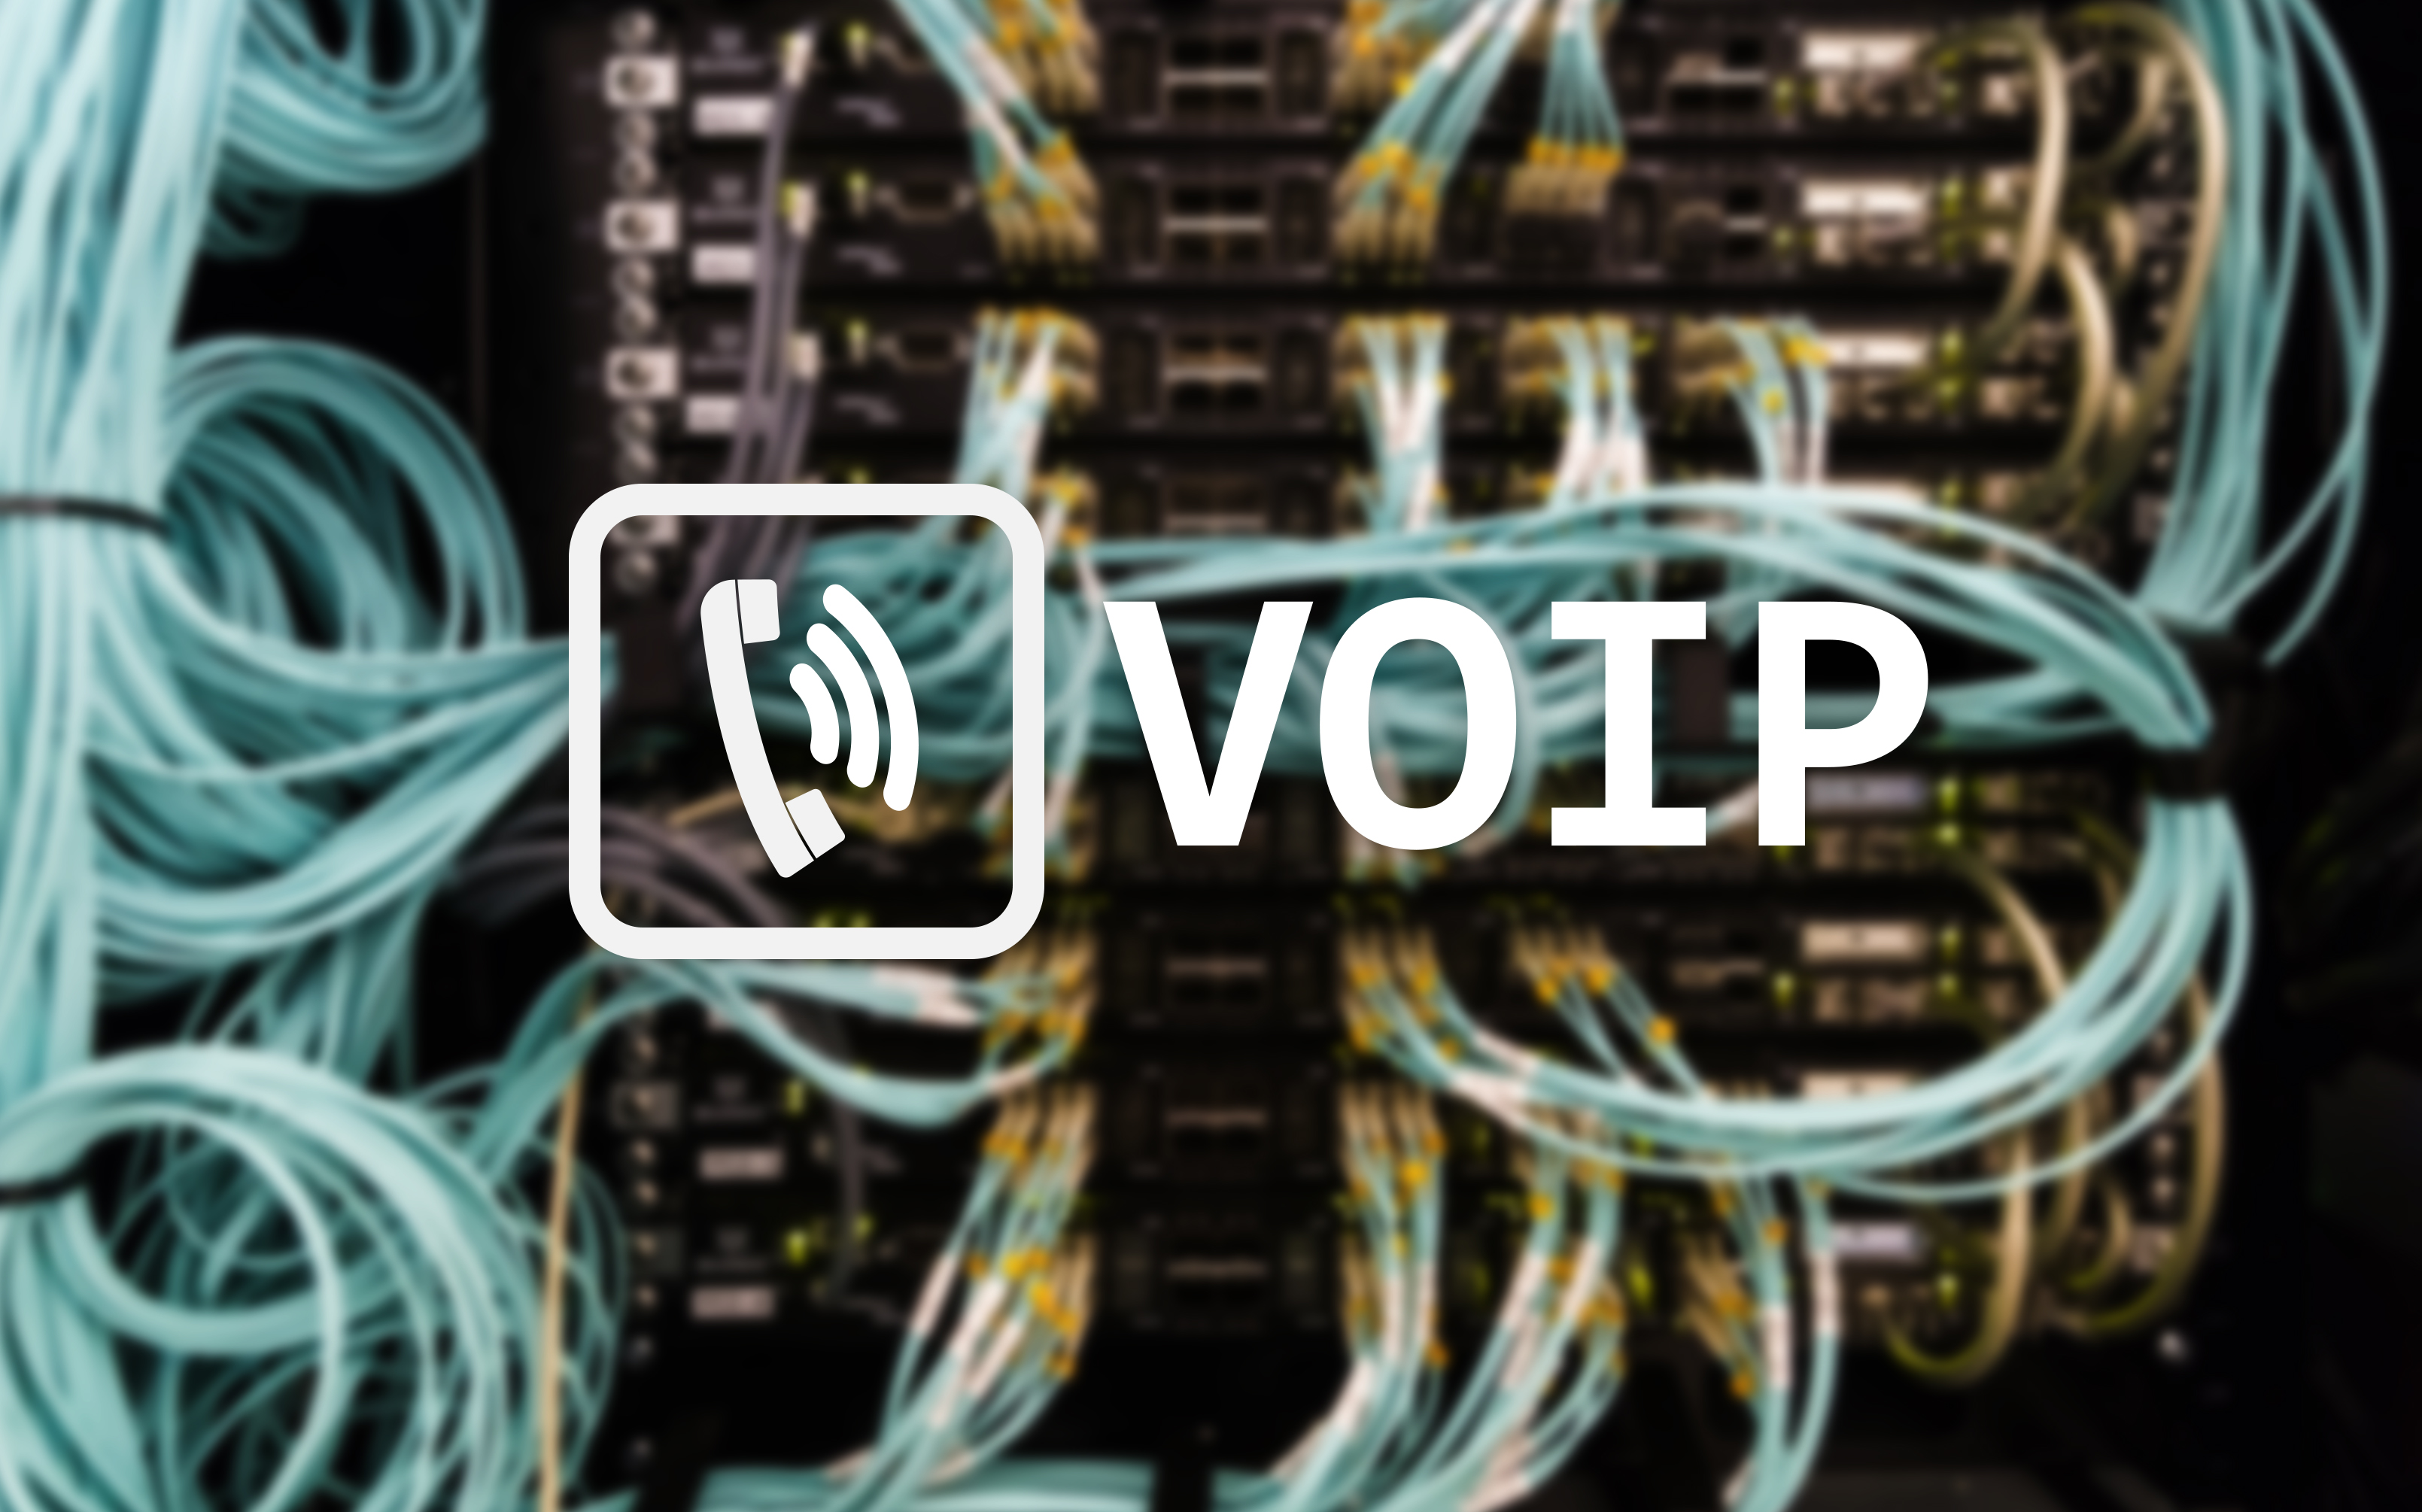 An image of cables in a server rack with VIOP as a label